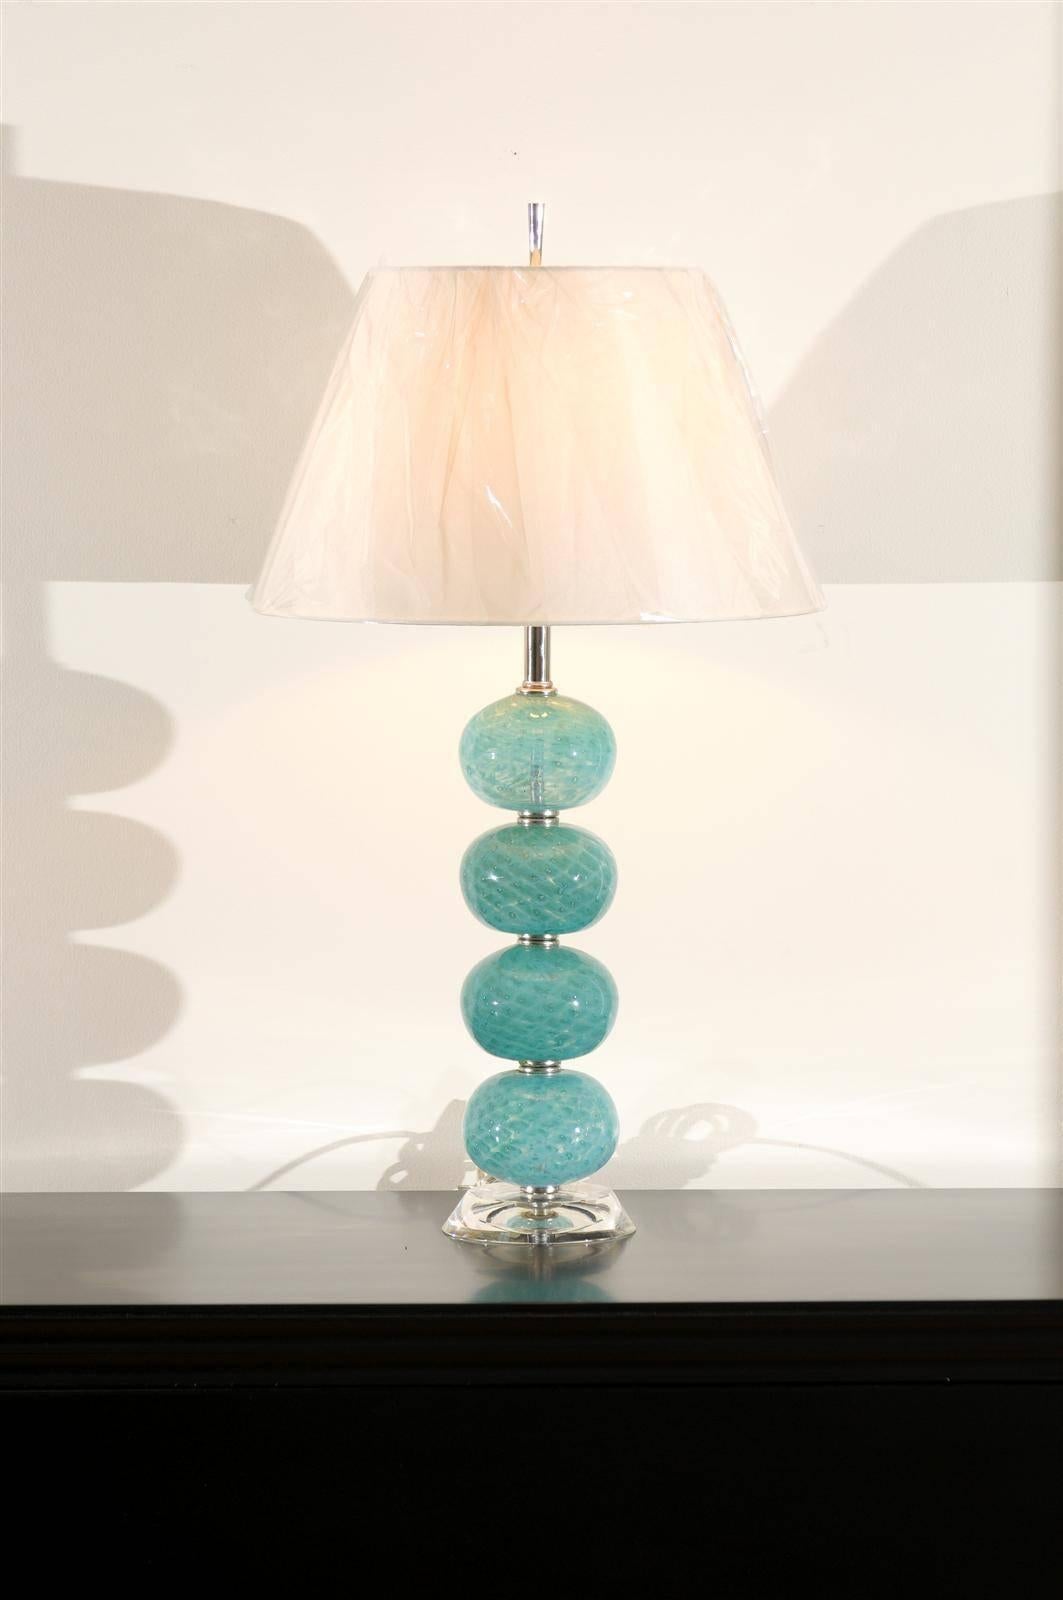 A stunning pair of vintage Murano lamps, circa 1970. Comprised of a series of blown glass balls, fabulous color and pattern introduced via reverse paint. Atop the original thick Lucite disk base. Exquisite jewelry! Excellent restored condition.